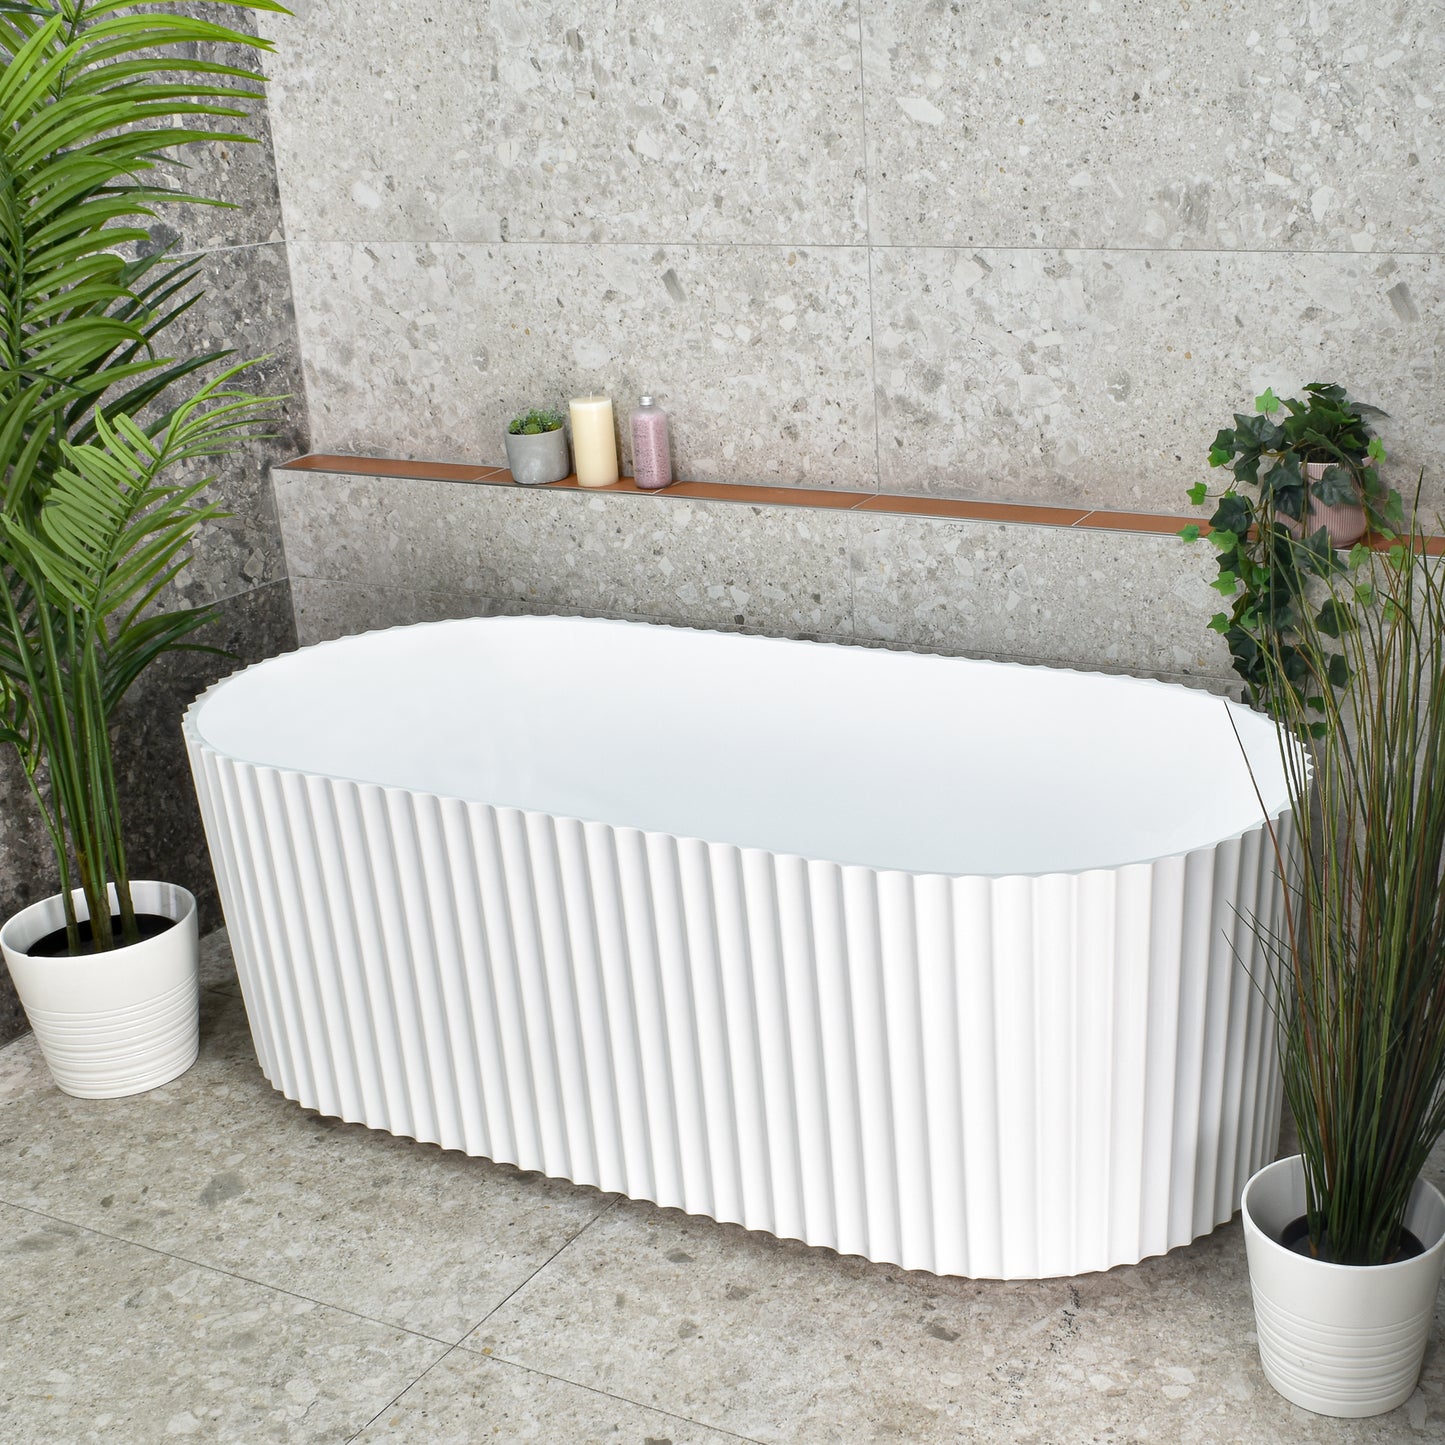 Agora Groove 1700mm Fluted Oval Freestanding Bath, Matte White